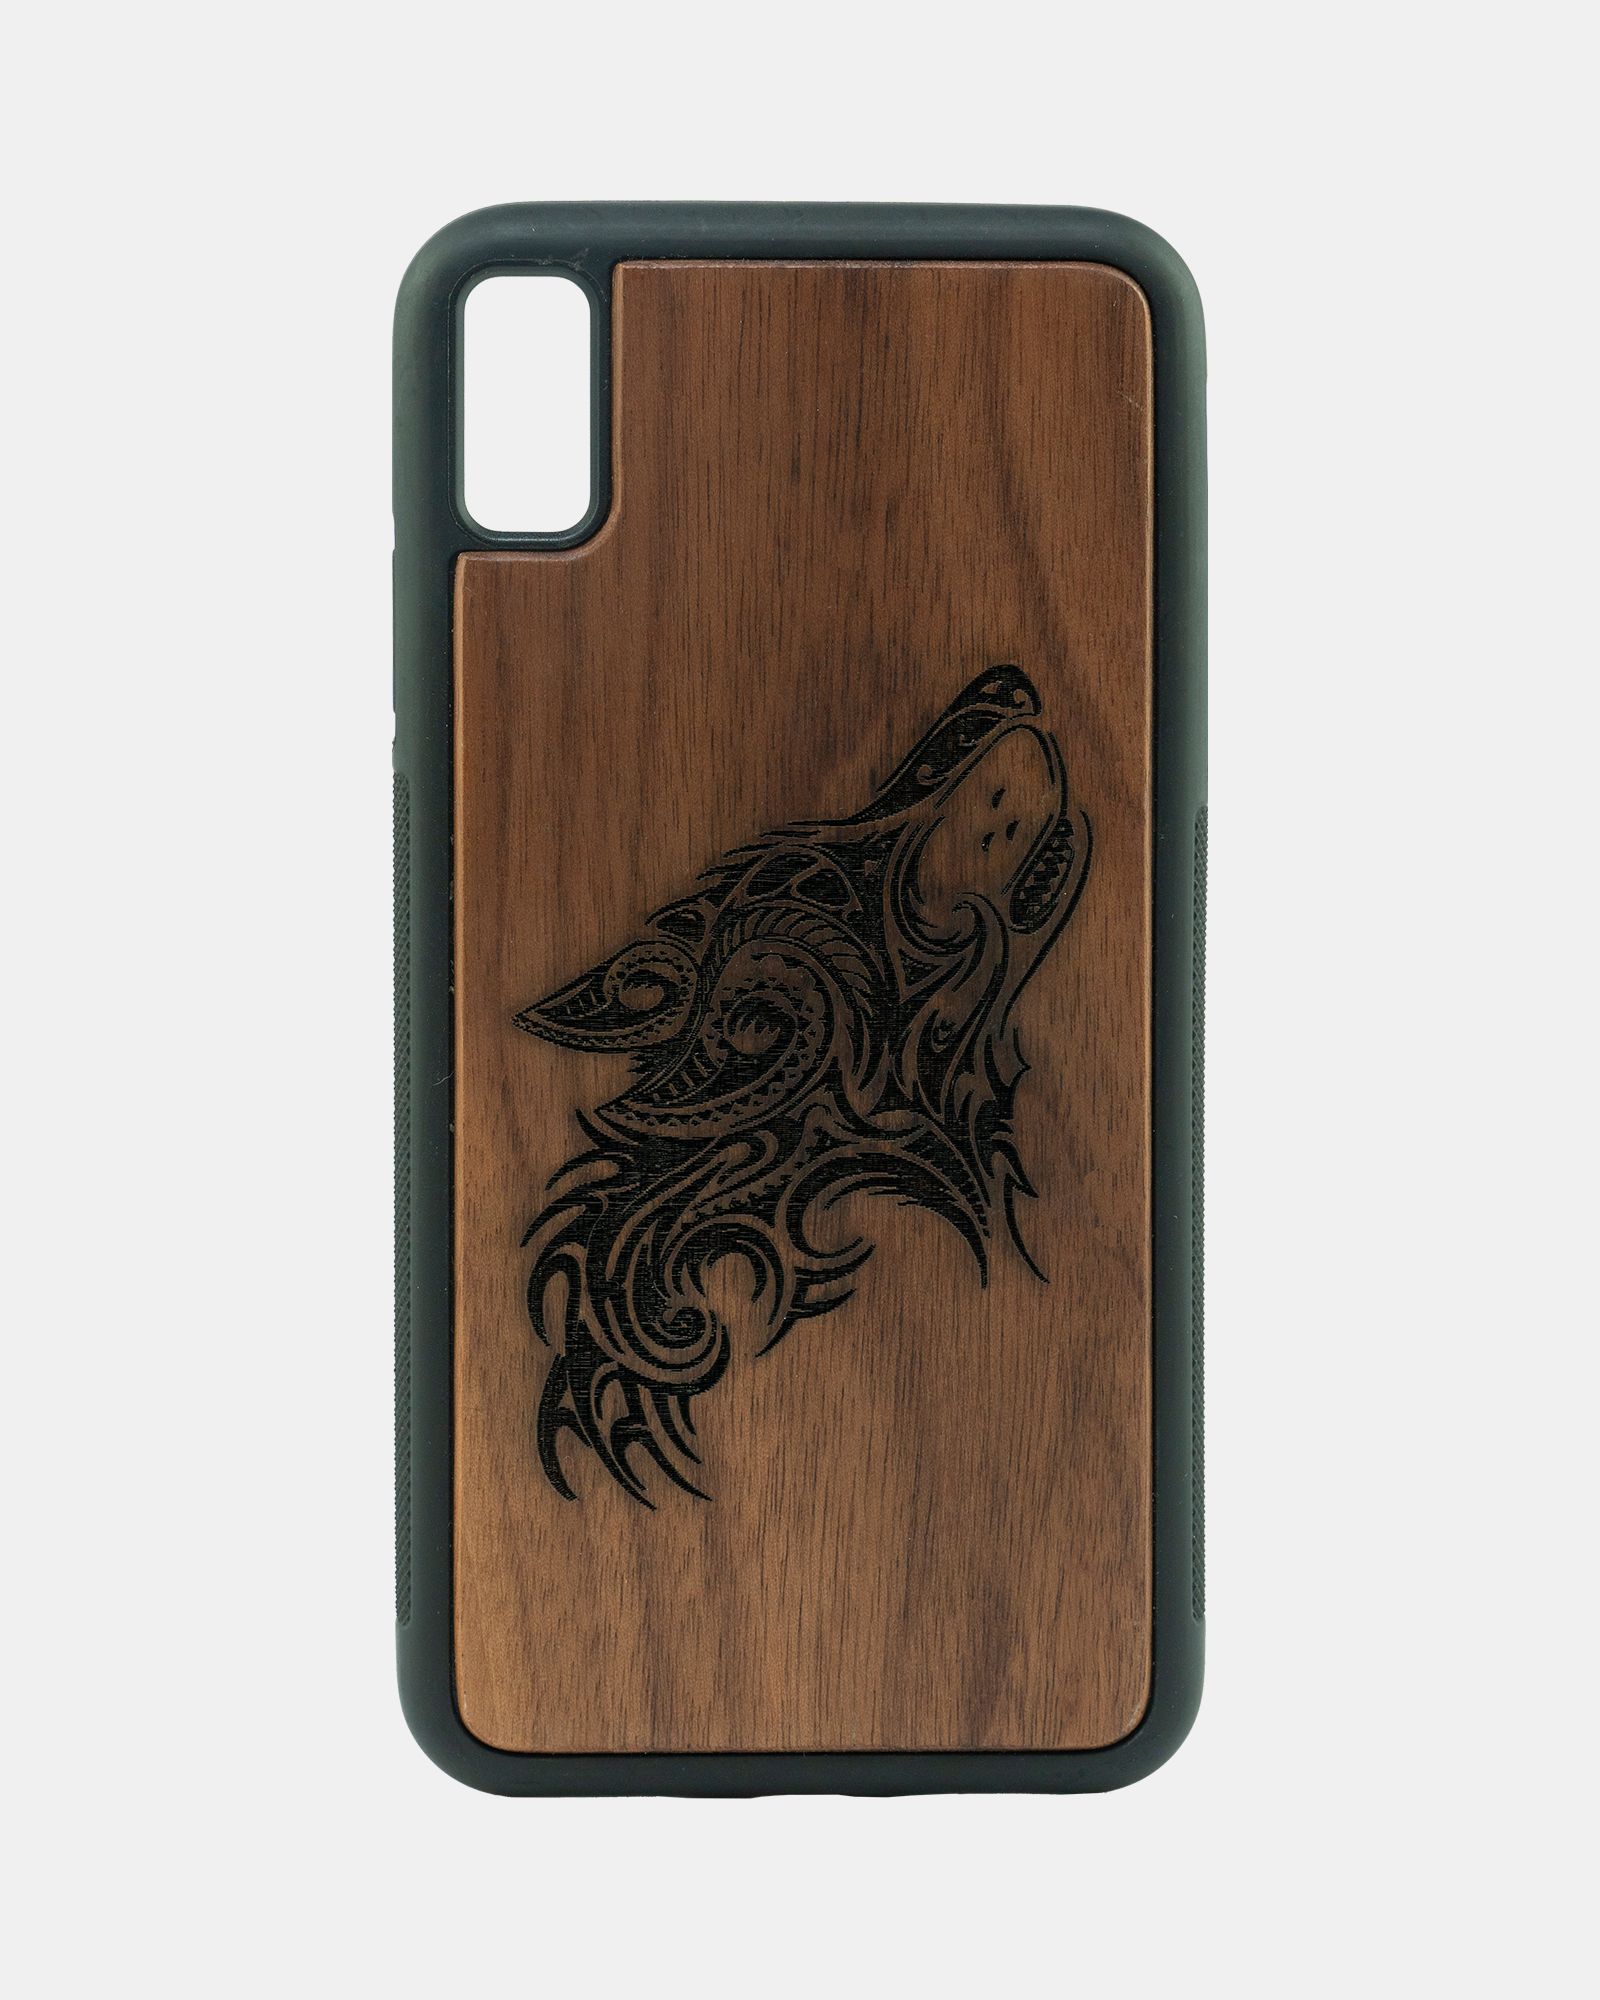  Silicon Wooden Iphone XS Max Case 